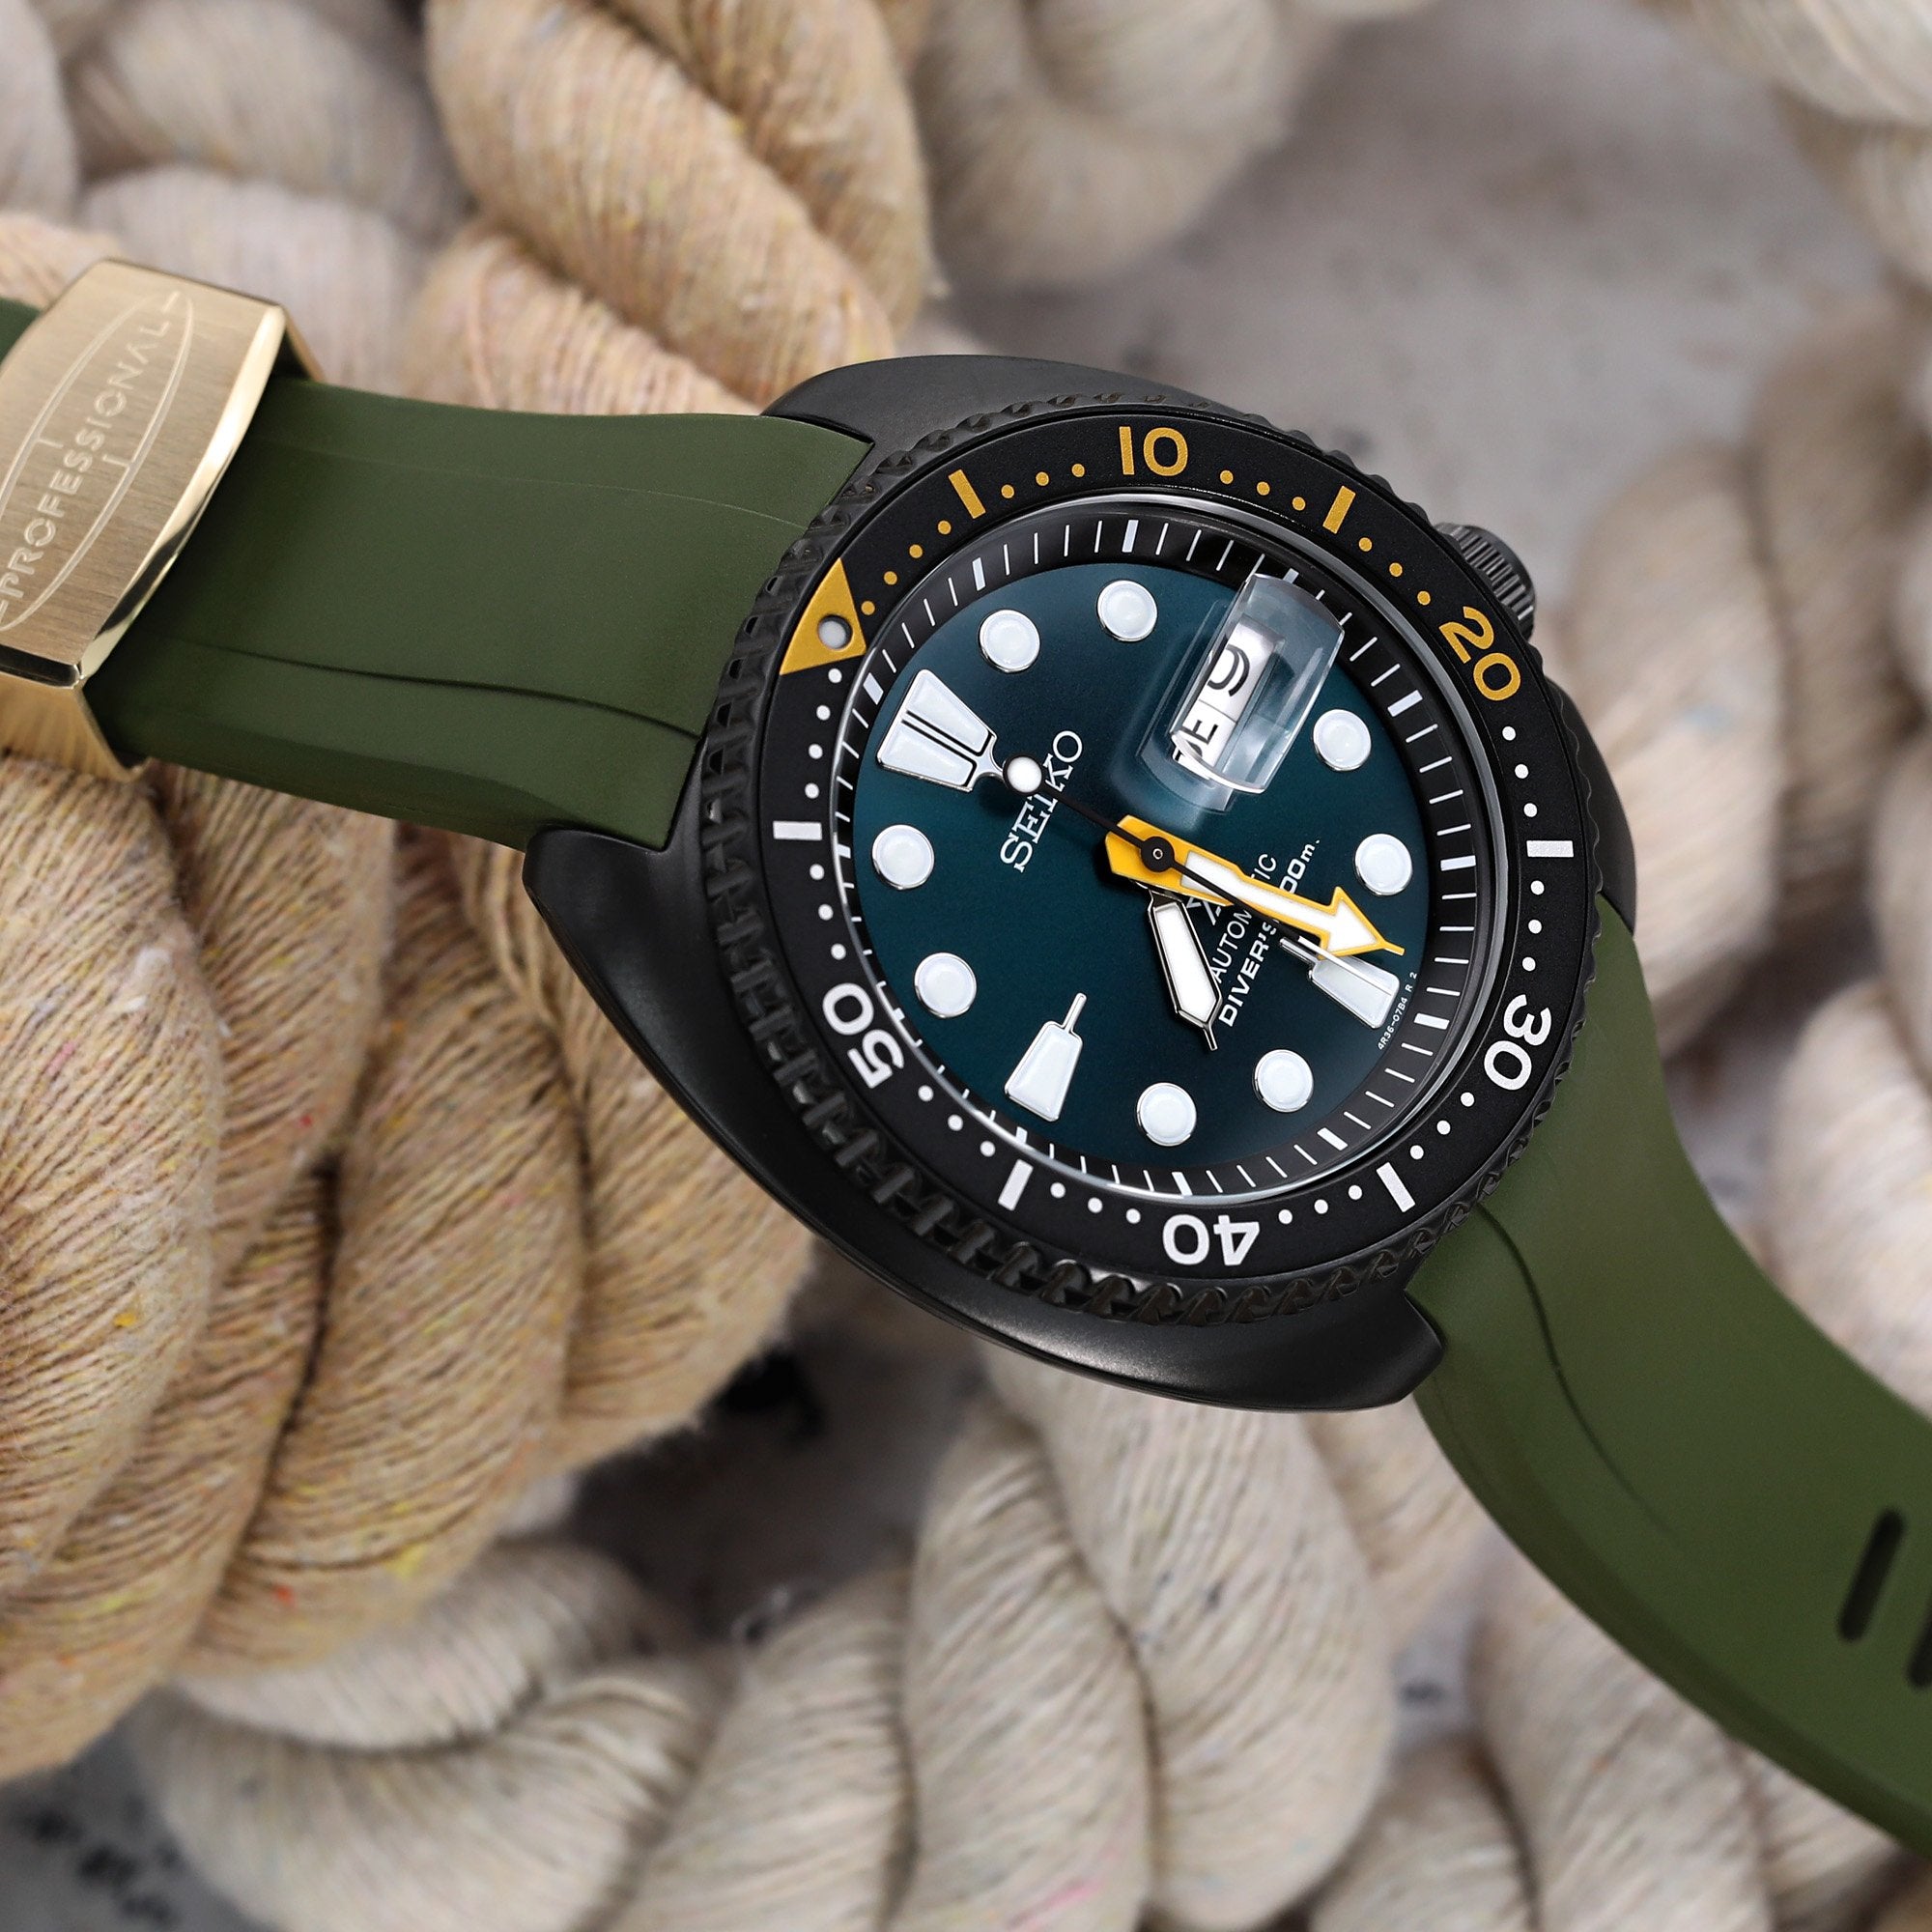 Seiko Prospex "Sea Grapes" Turtle SRPD45K1 Limited Edition 1800Pcs Strapcode Watch Bands